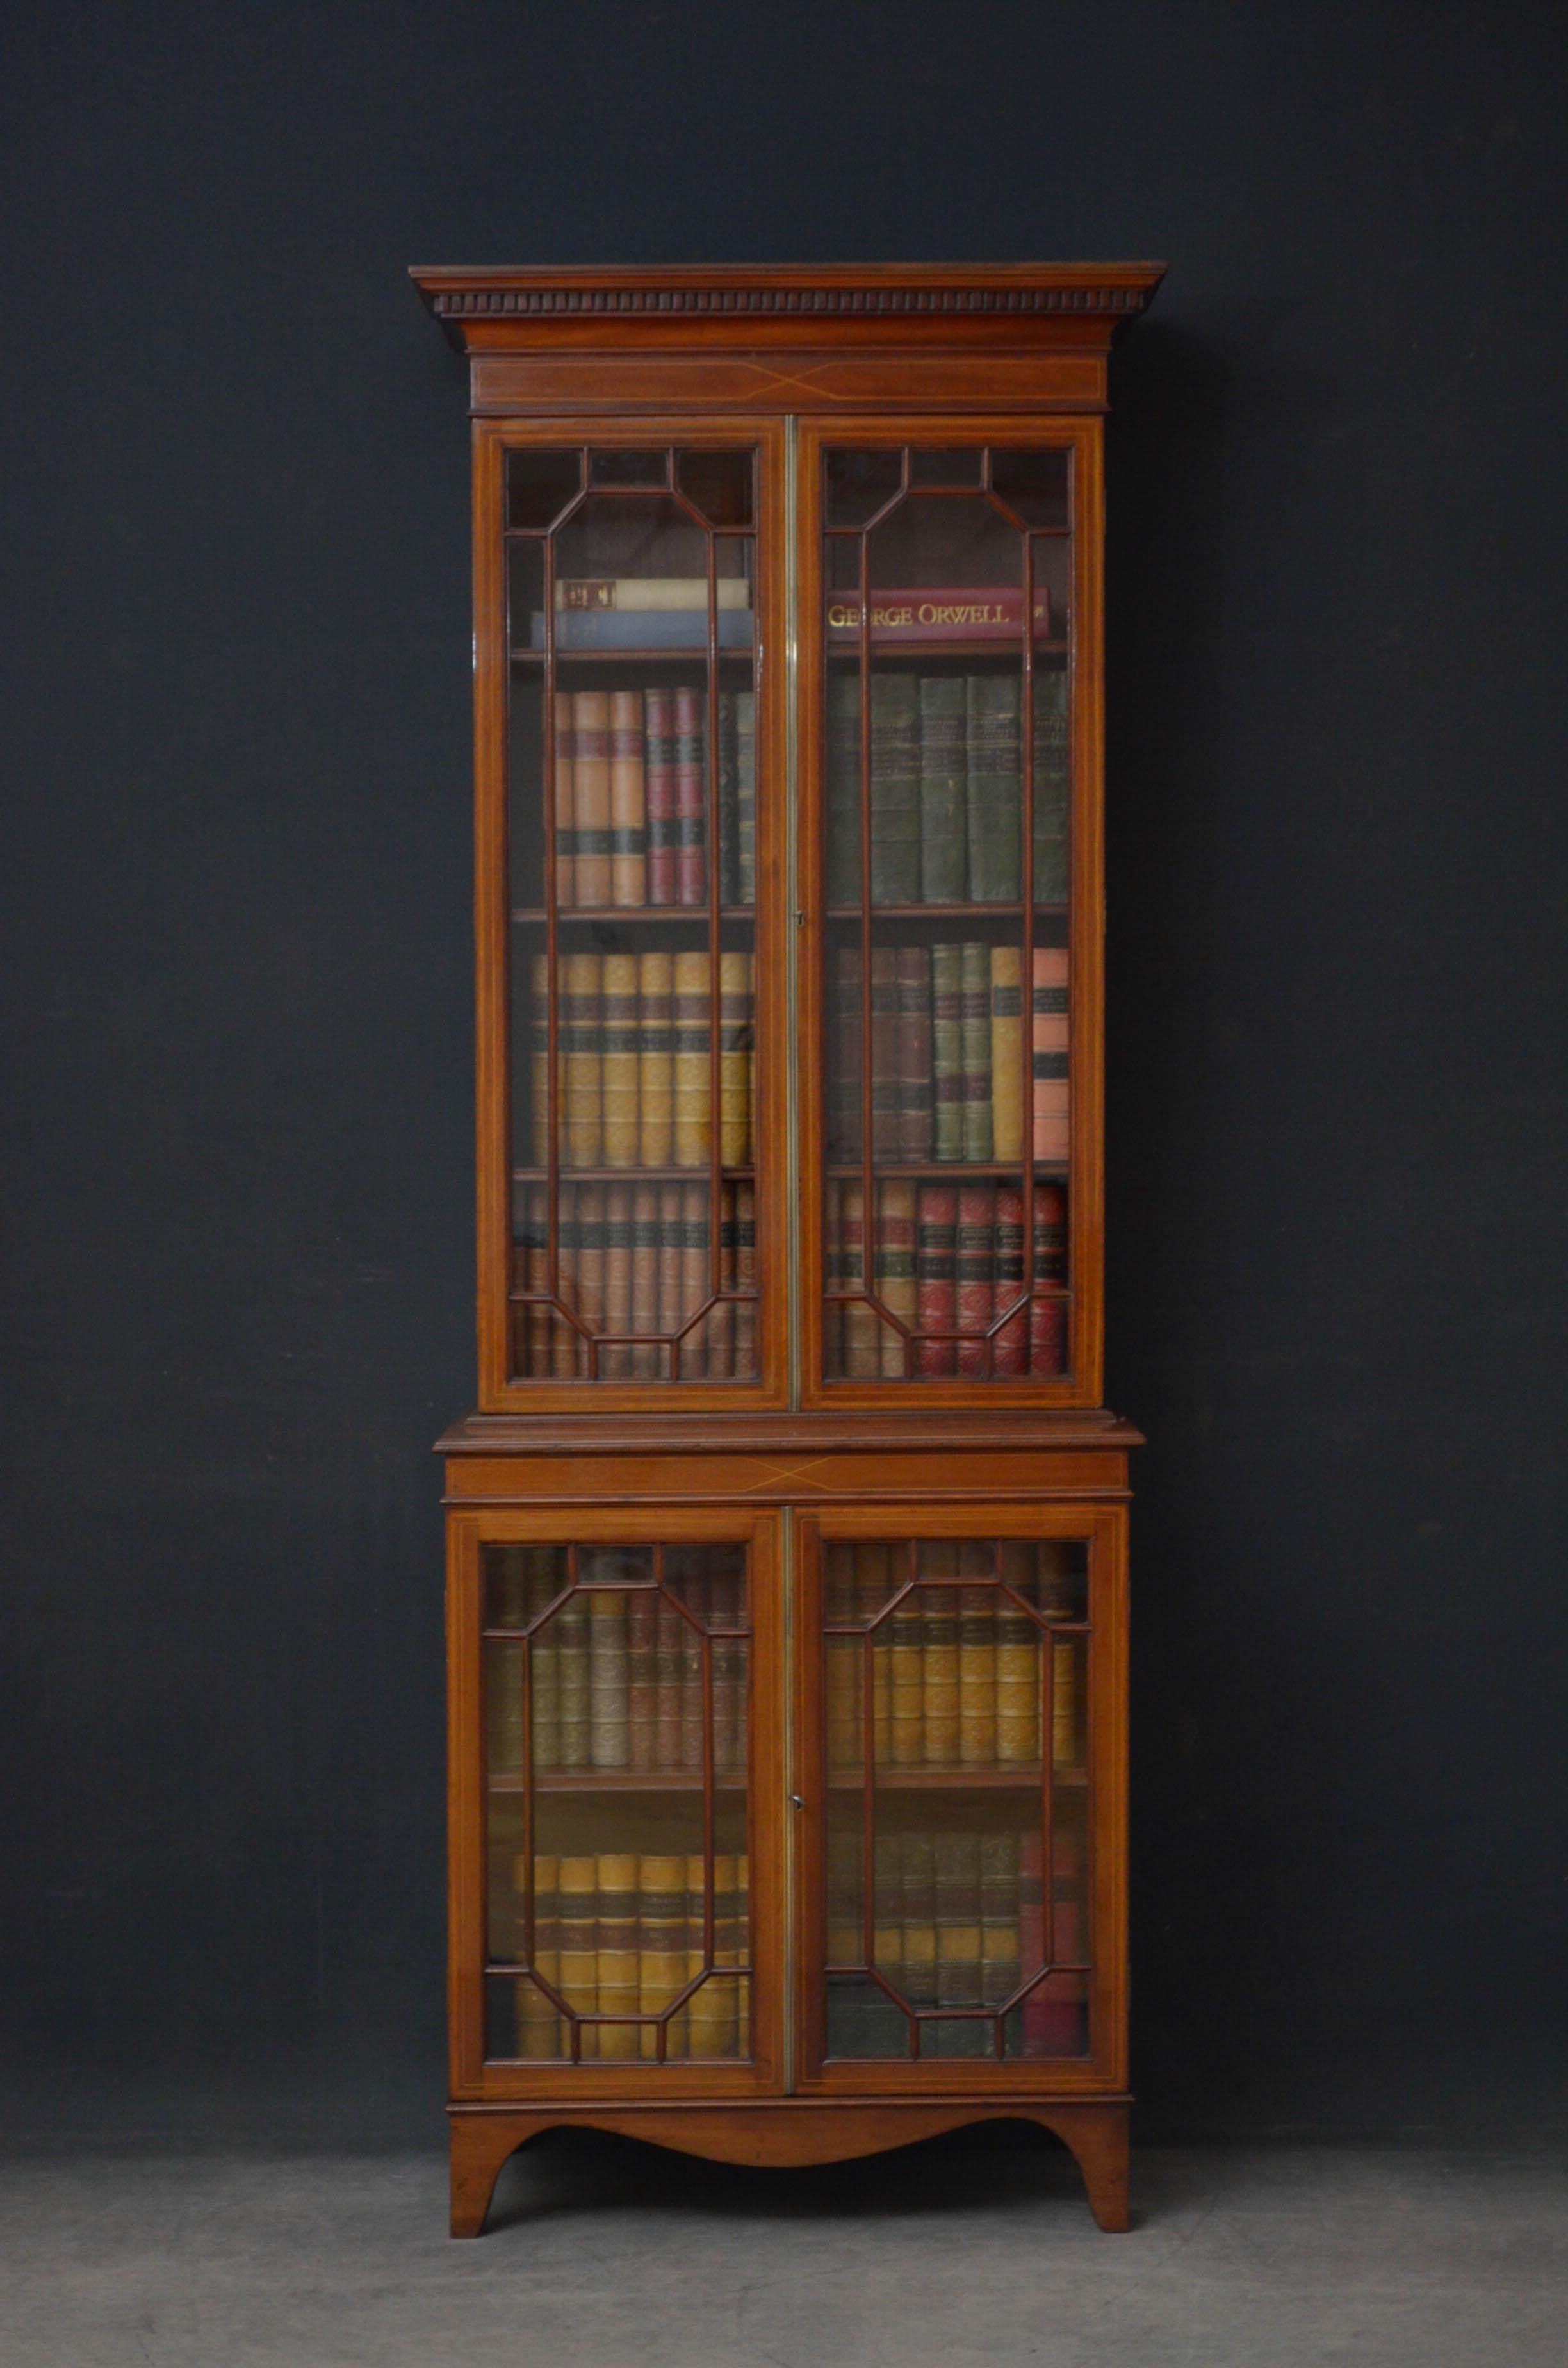 Sn4820 Edwardian mahogany glazed bookcase, having cavetto cornice above satinwood inlaid frieze and a pair of astragal glazed doors with brass centre beading and original working lock, enclosing 3 height adjustable shelves. Projecting base having